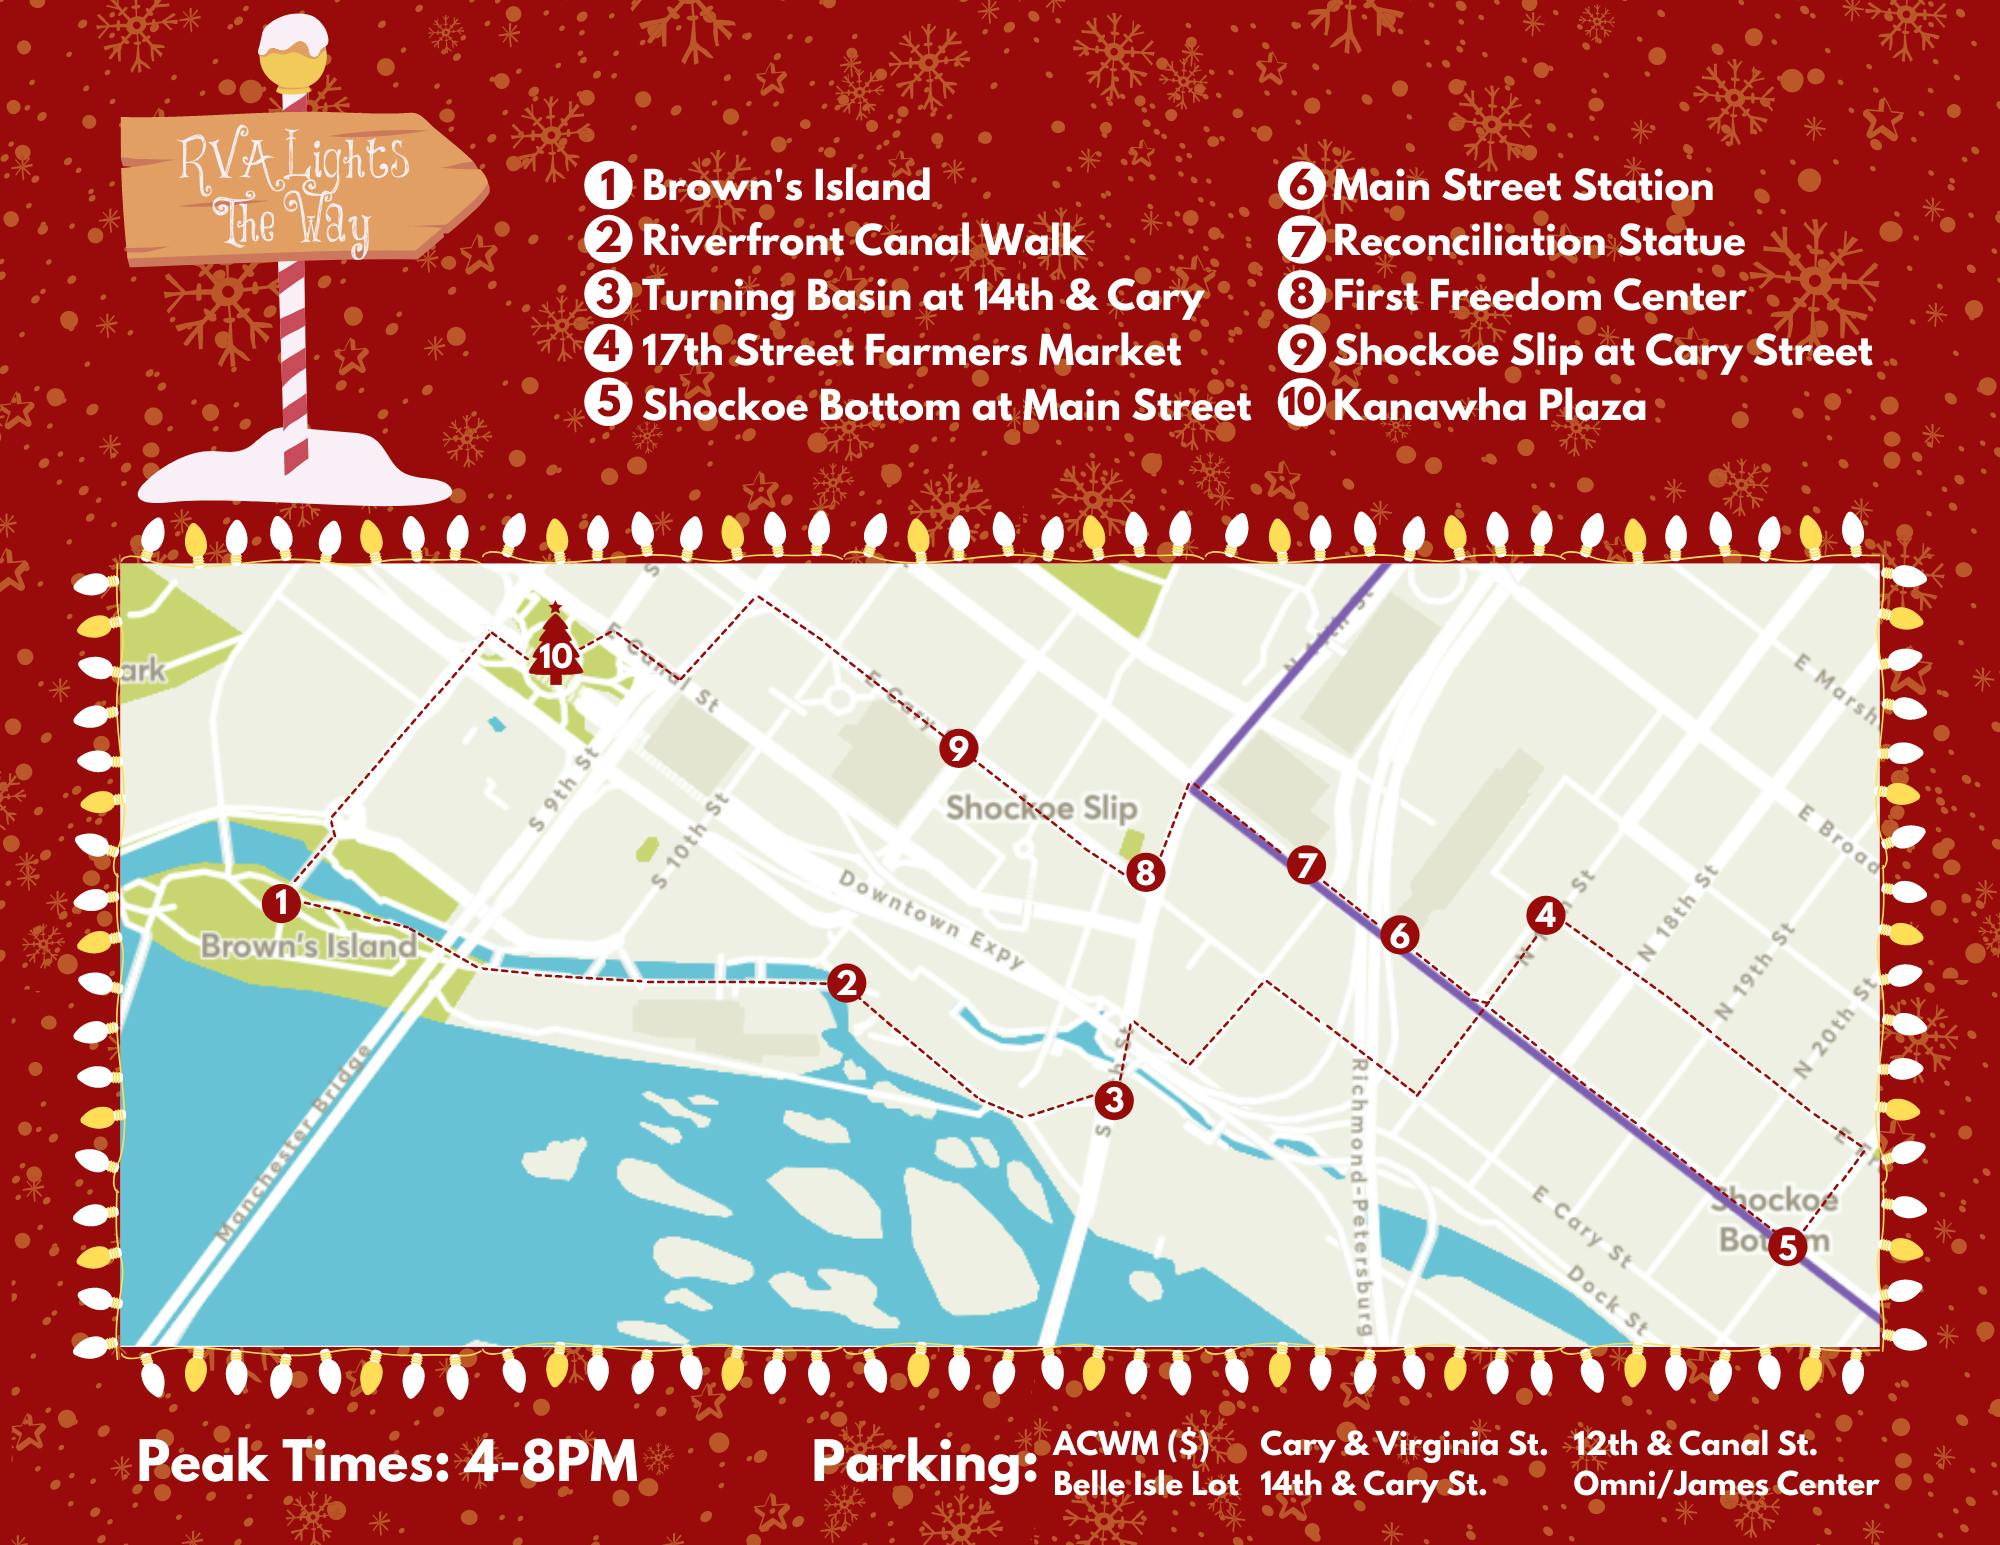 RVA Lights The Way: A Holiday Walking Tour of Downtown Richmond